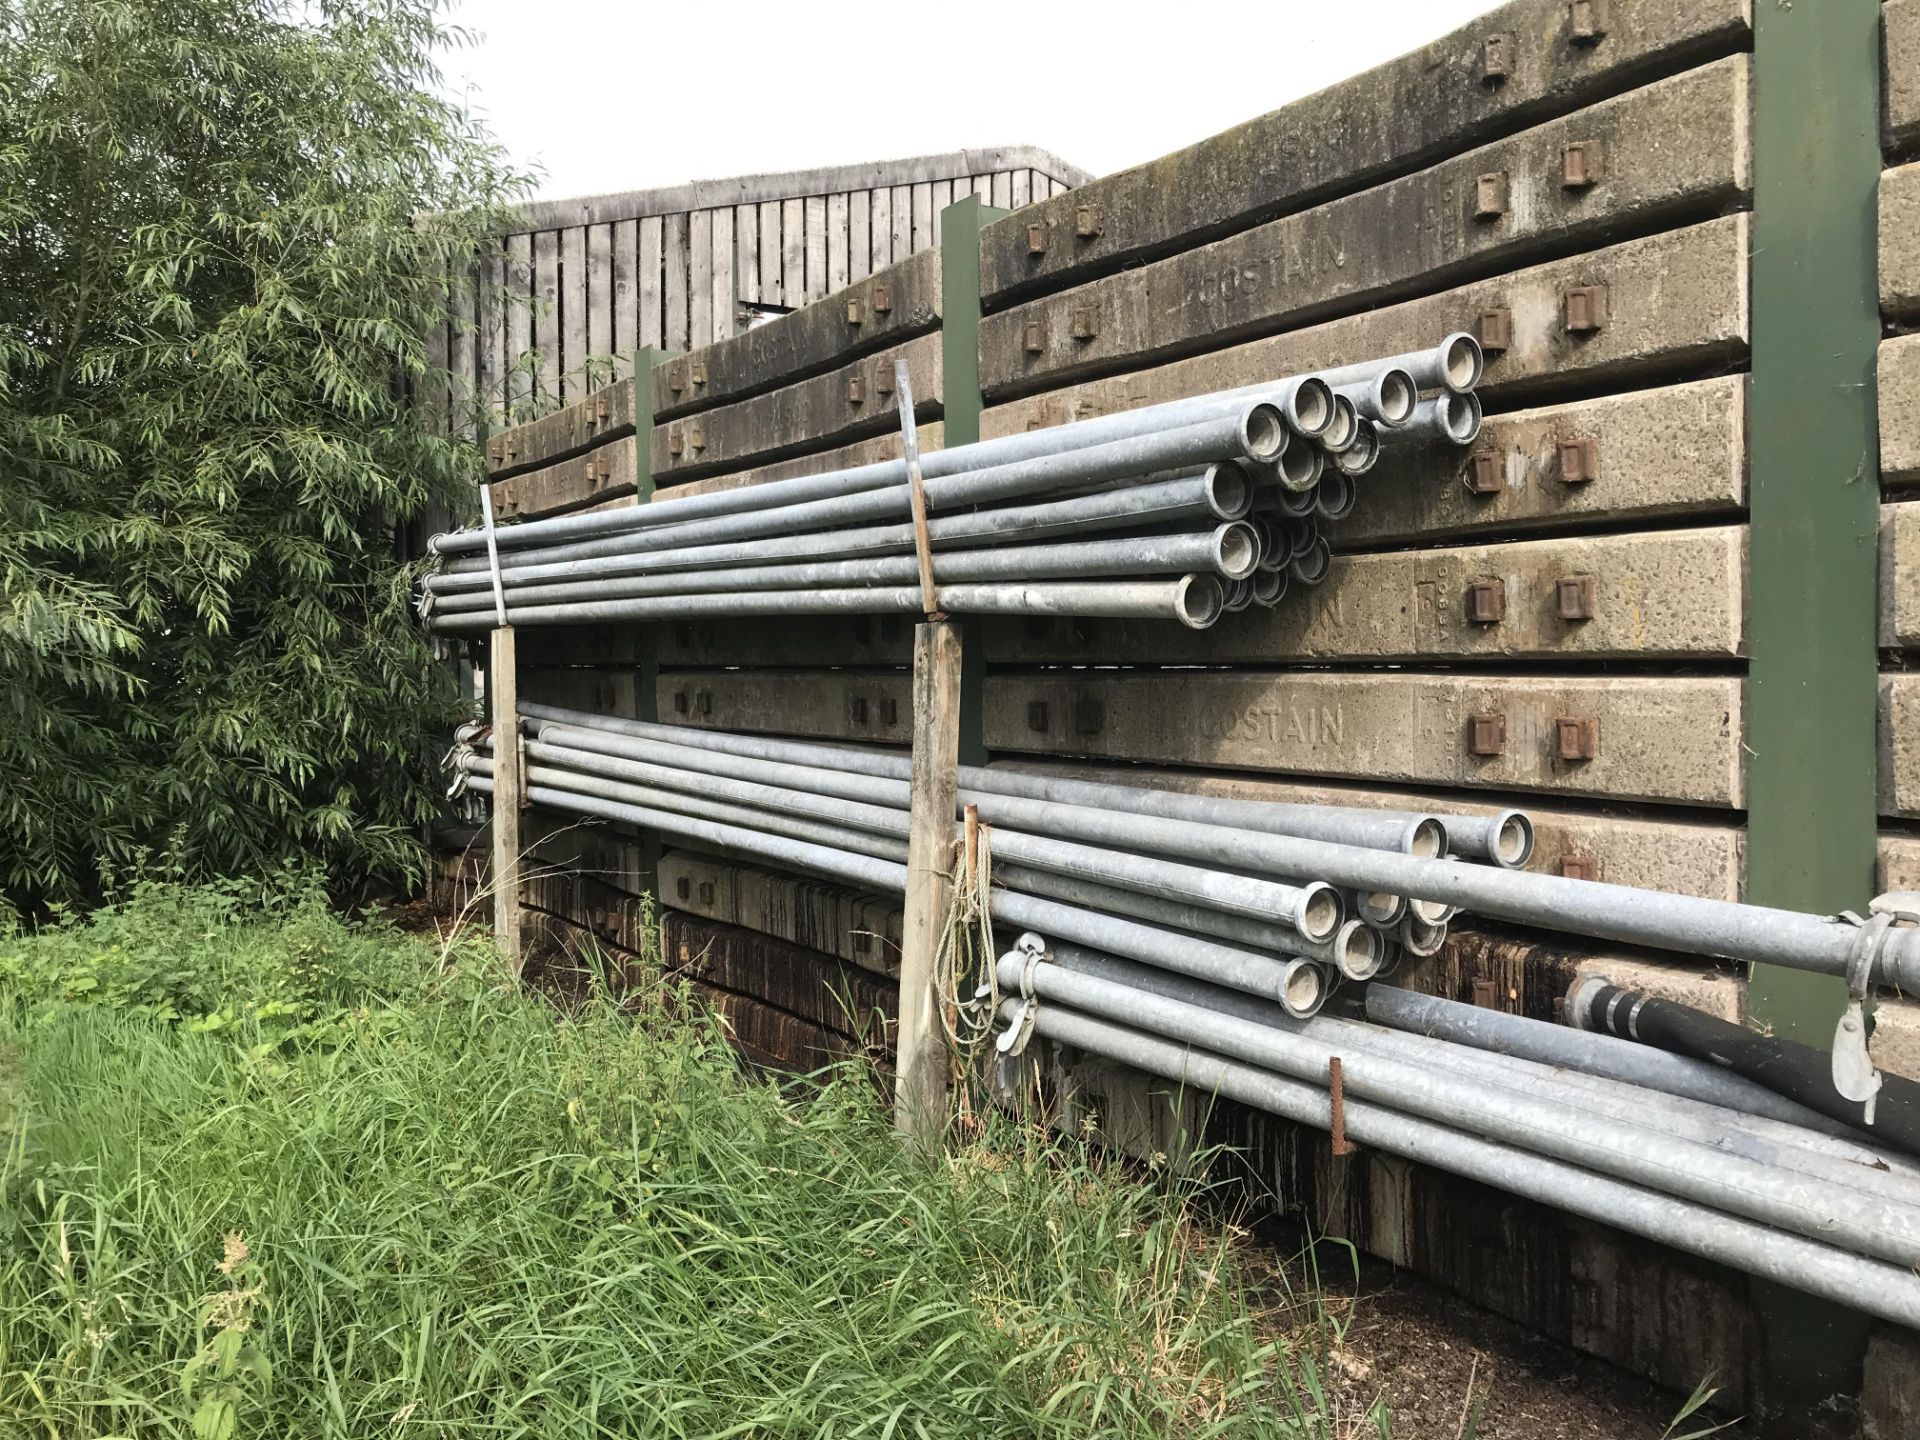 Irrigation pipes x 28 - Image 2 of 2